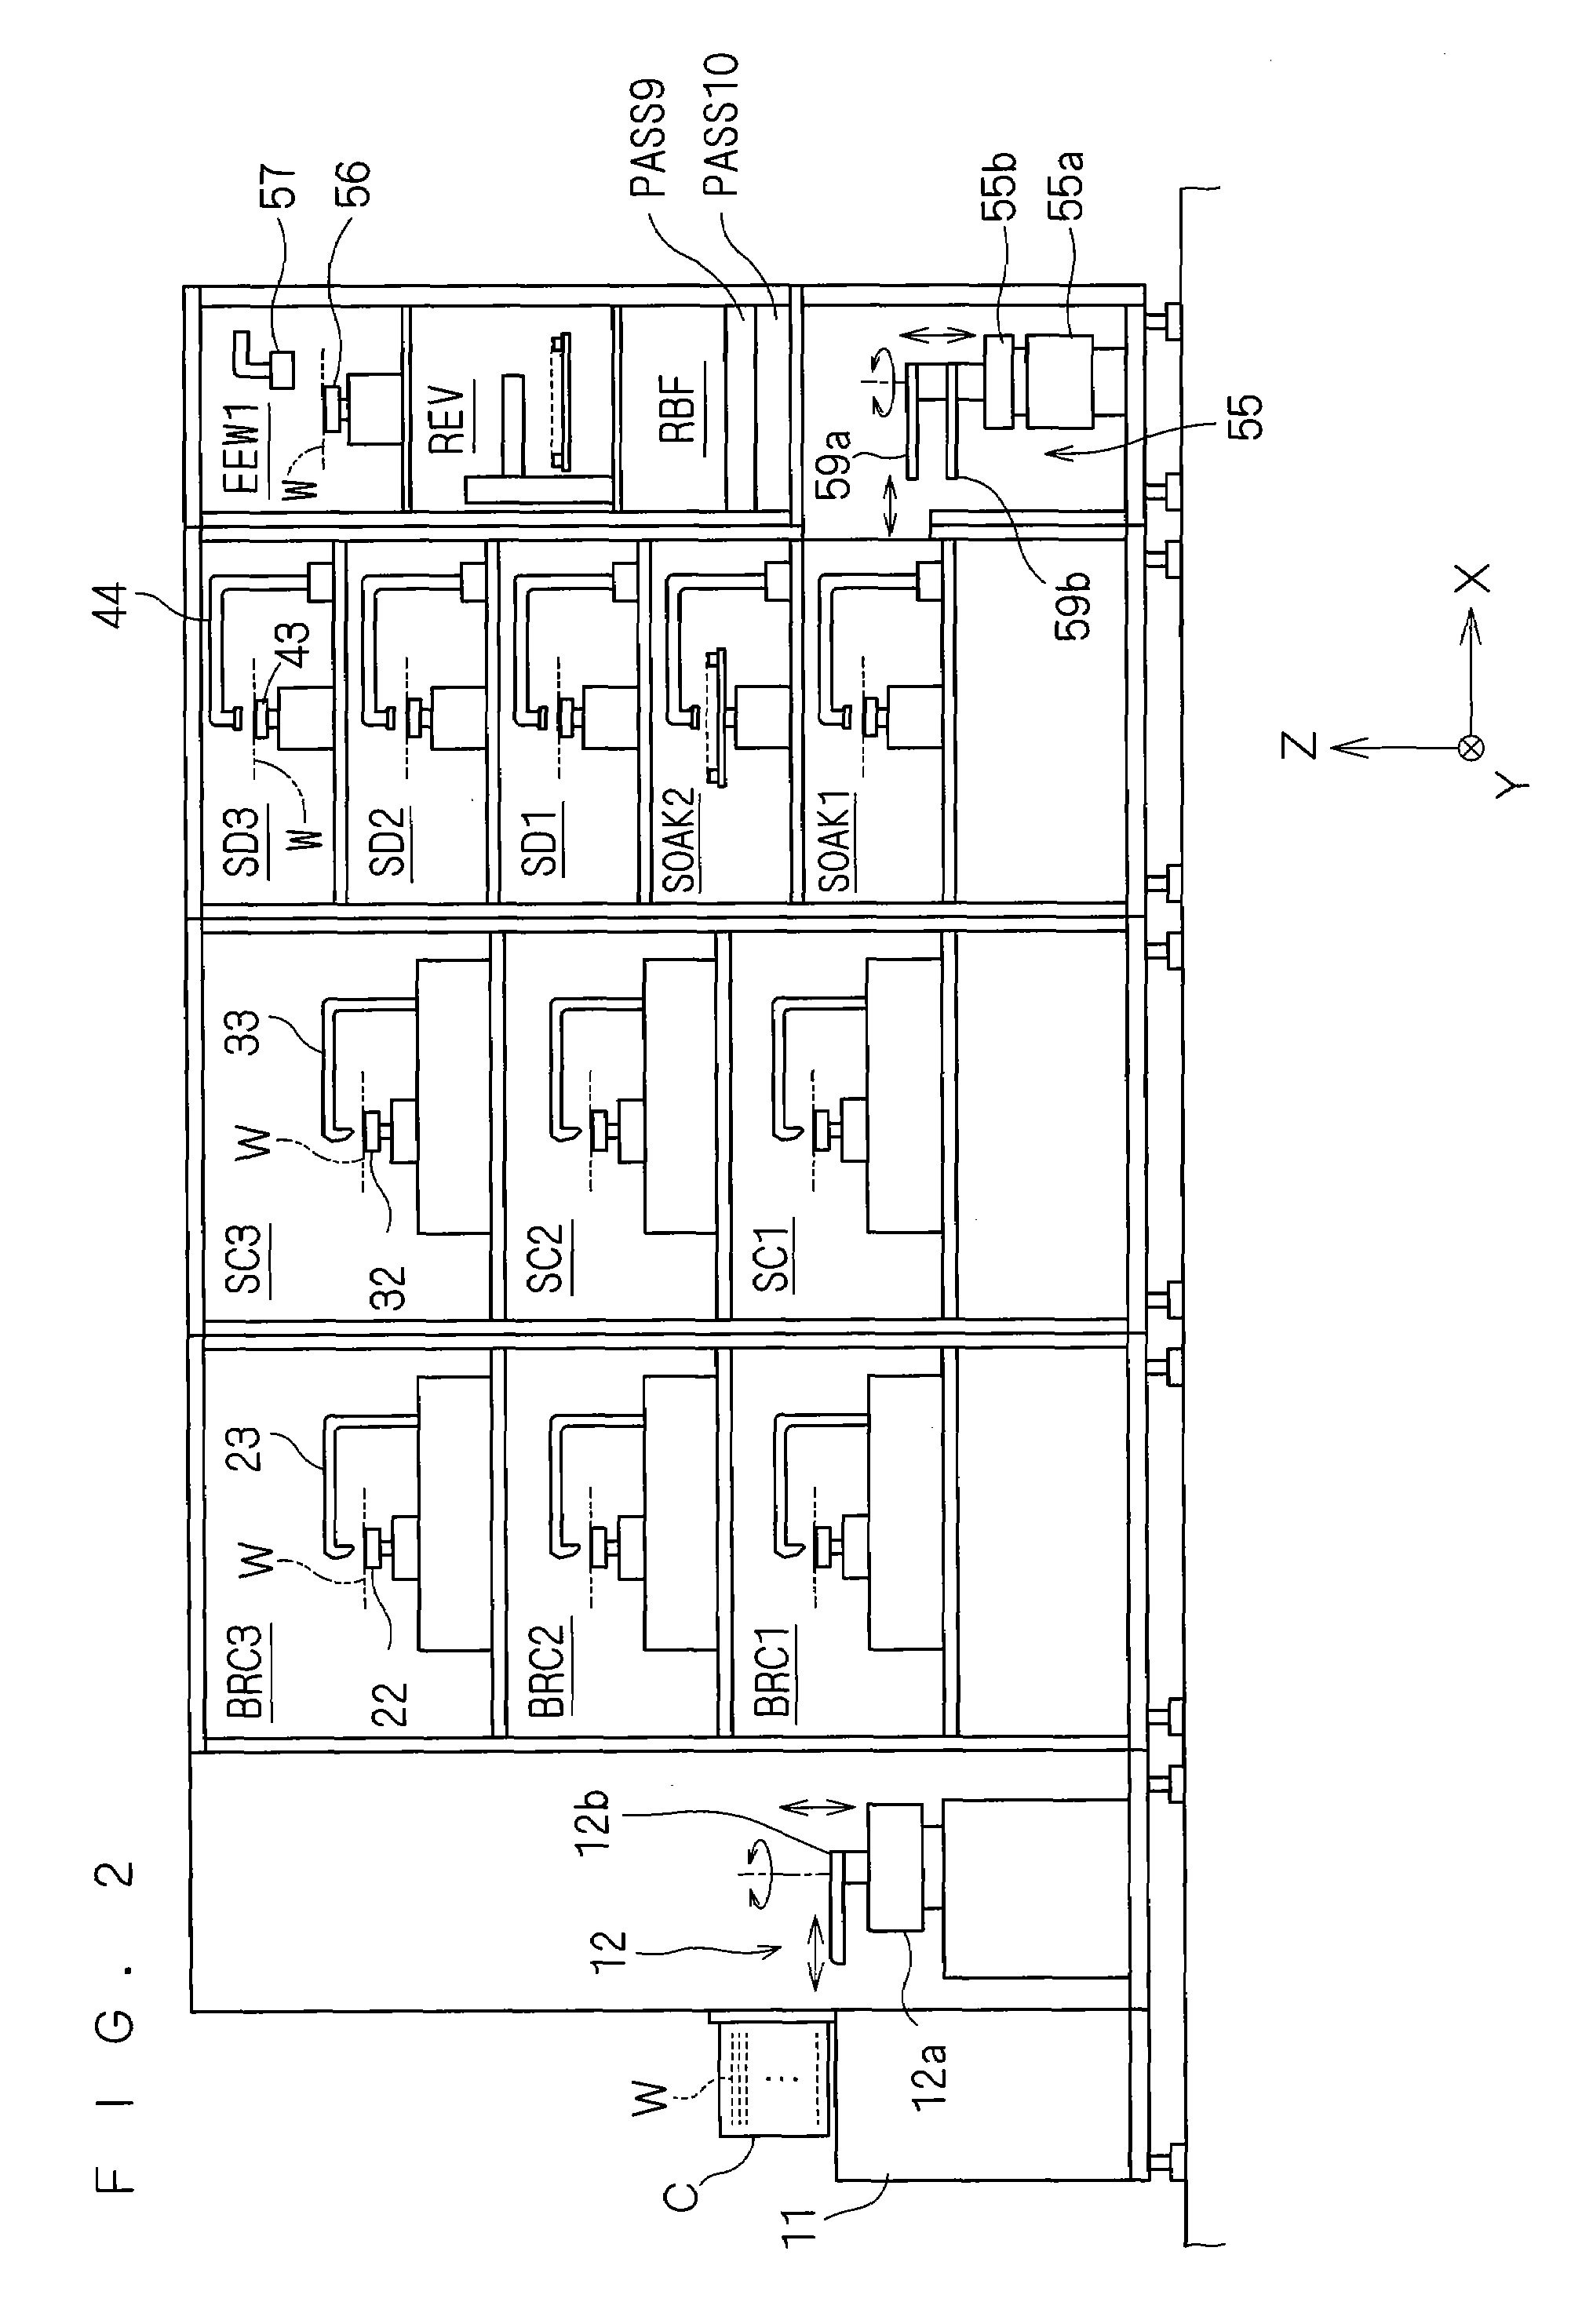 Method of processing substrate, substrate processing system and substrate processing apparatus